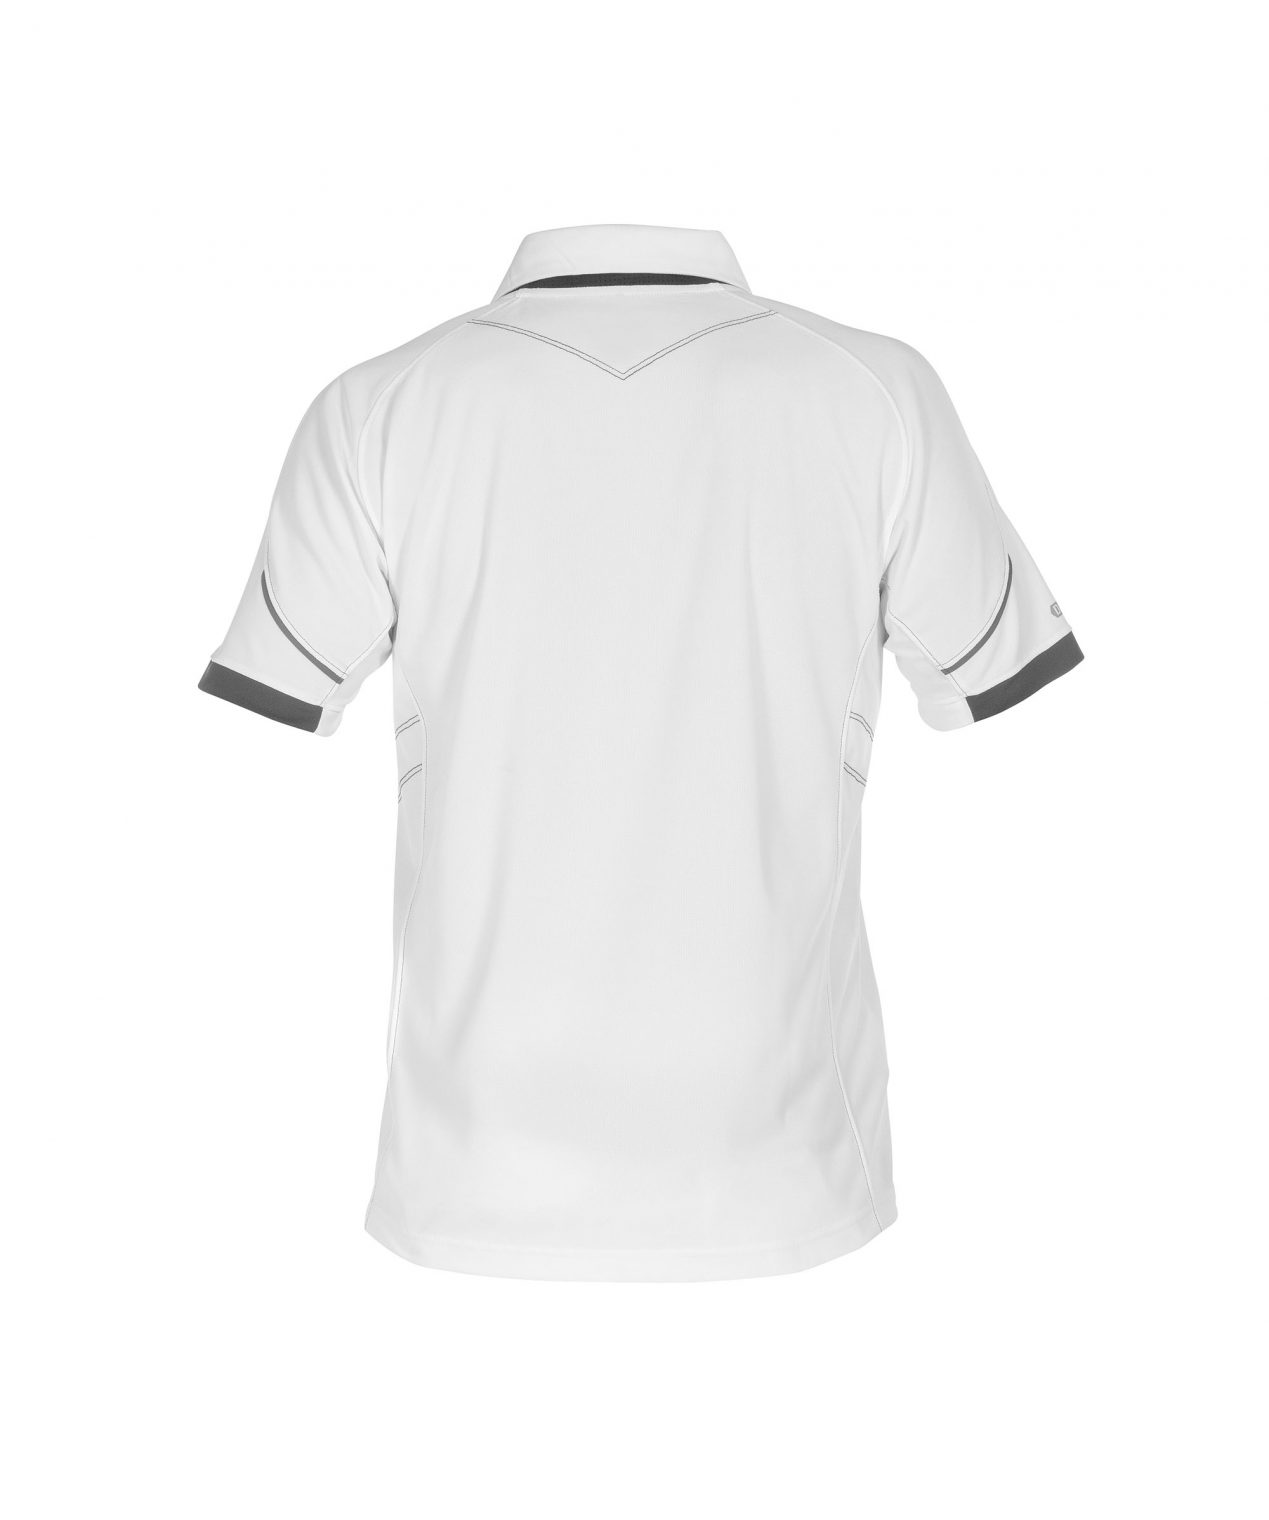 traxion polo shirt white anthracite grey back